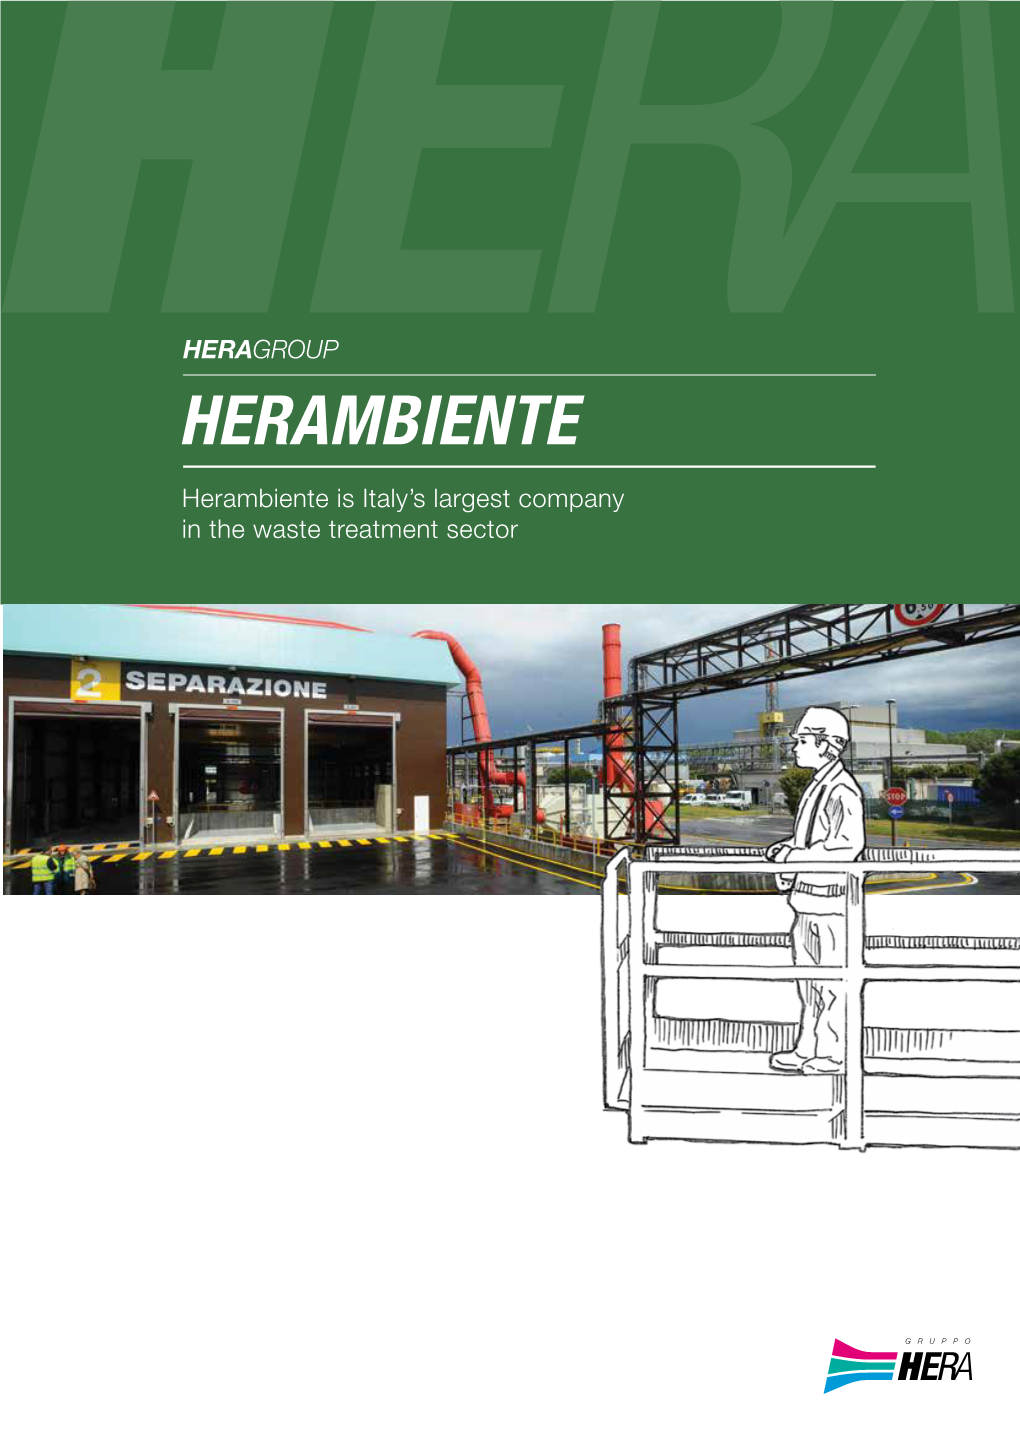 Herambiente Herambiente Is Italy’S Largest Company in the Waste Treatment Sector